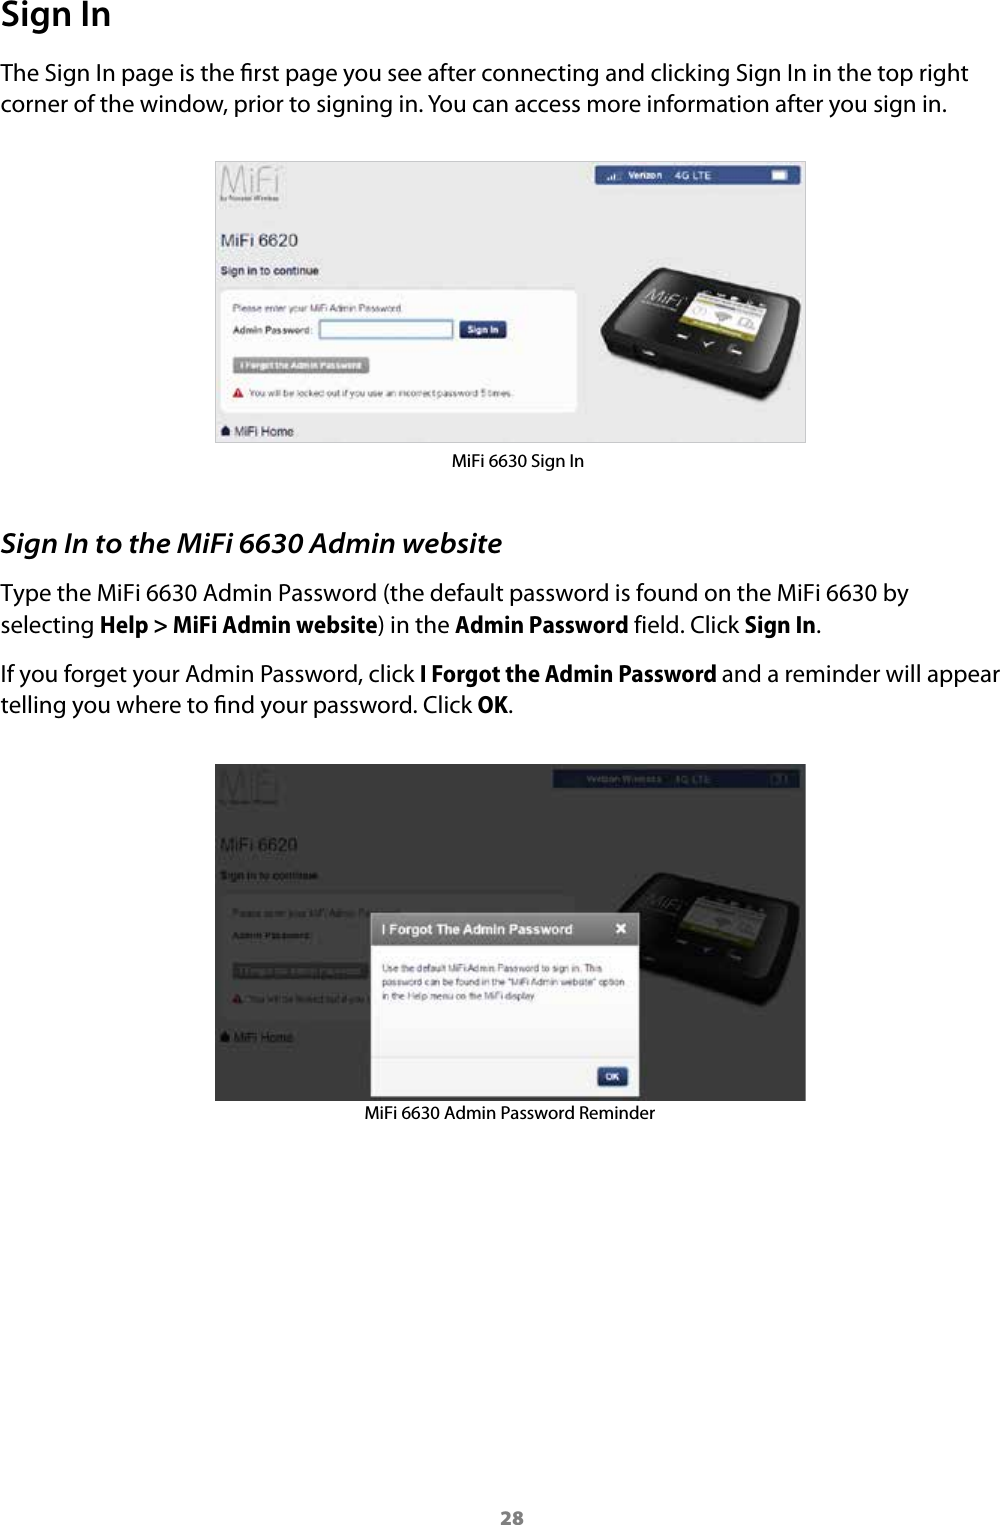 28Sign InThe Sign In page is the rst page you see after connecting and clicking Sign In in the top right corner of the window, prior to signing in. You can access more information after you sign in. MiFi 6630 Sign InSign In to the MiFi 6630 Admin websiteType the MiFi 6630 Admin Password (the default password is found on the MiFi 6630 by selecting Help &gt; MiFi Admin website) in the Admin Password field. Click Sign In. If you forget your Admin Password, click I Forgot the Admin Password and a reminder will appear telling you where to nd your password. Click OK.MiFi 6630 Admin Password Reminder